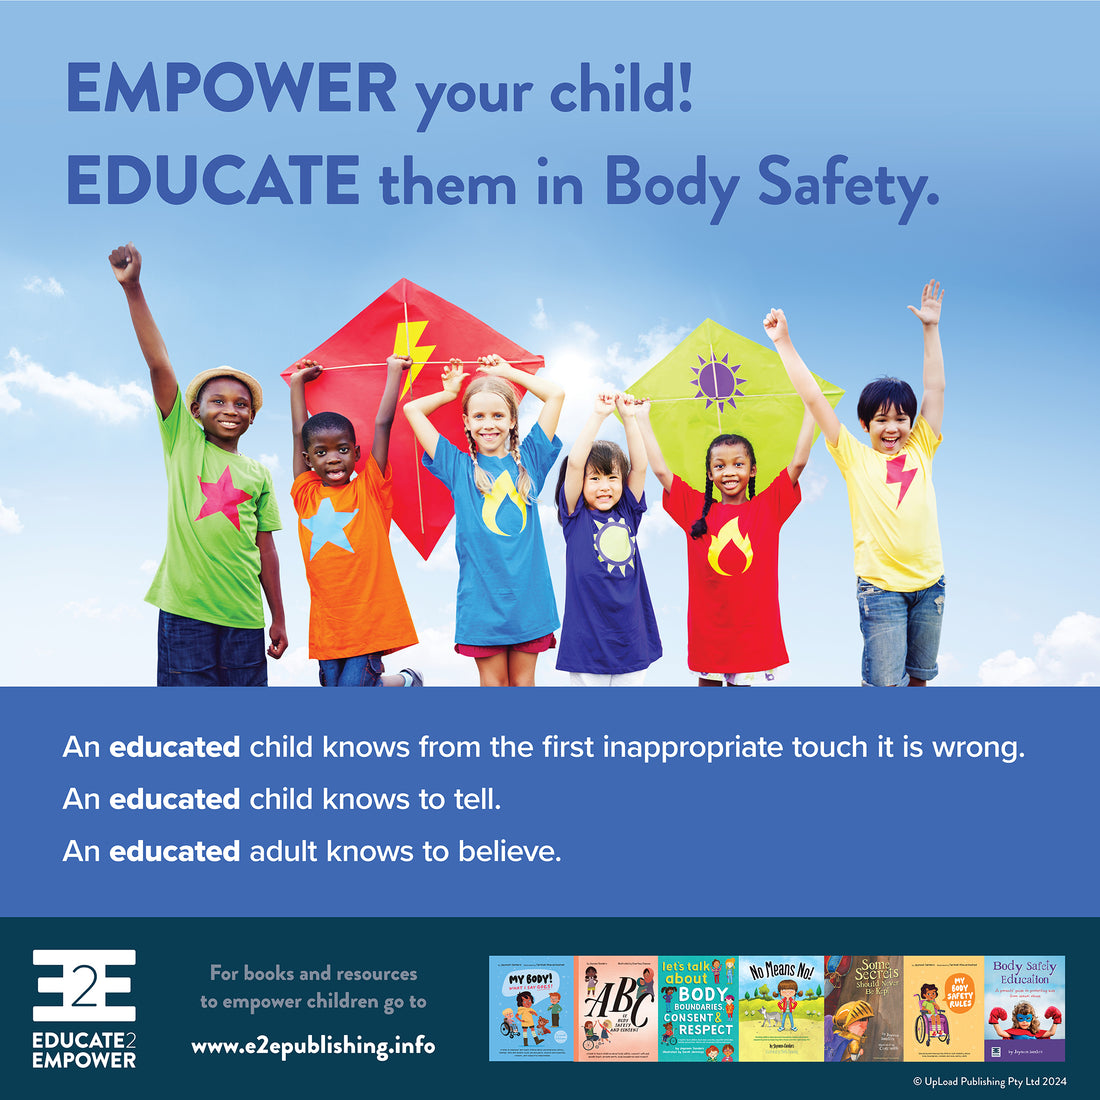 EMPOWER your child! EDUCATE them in Body Safety.